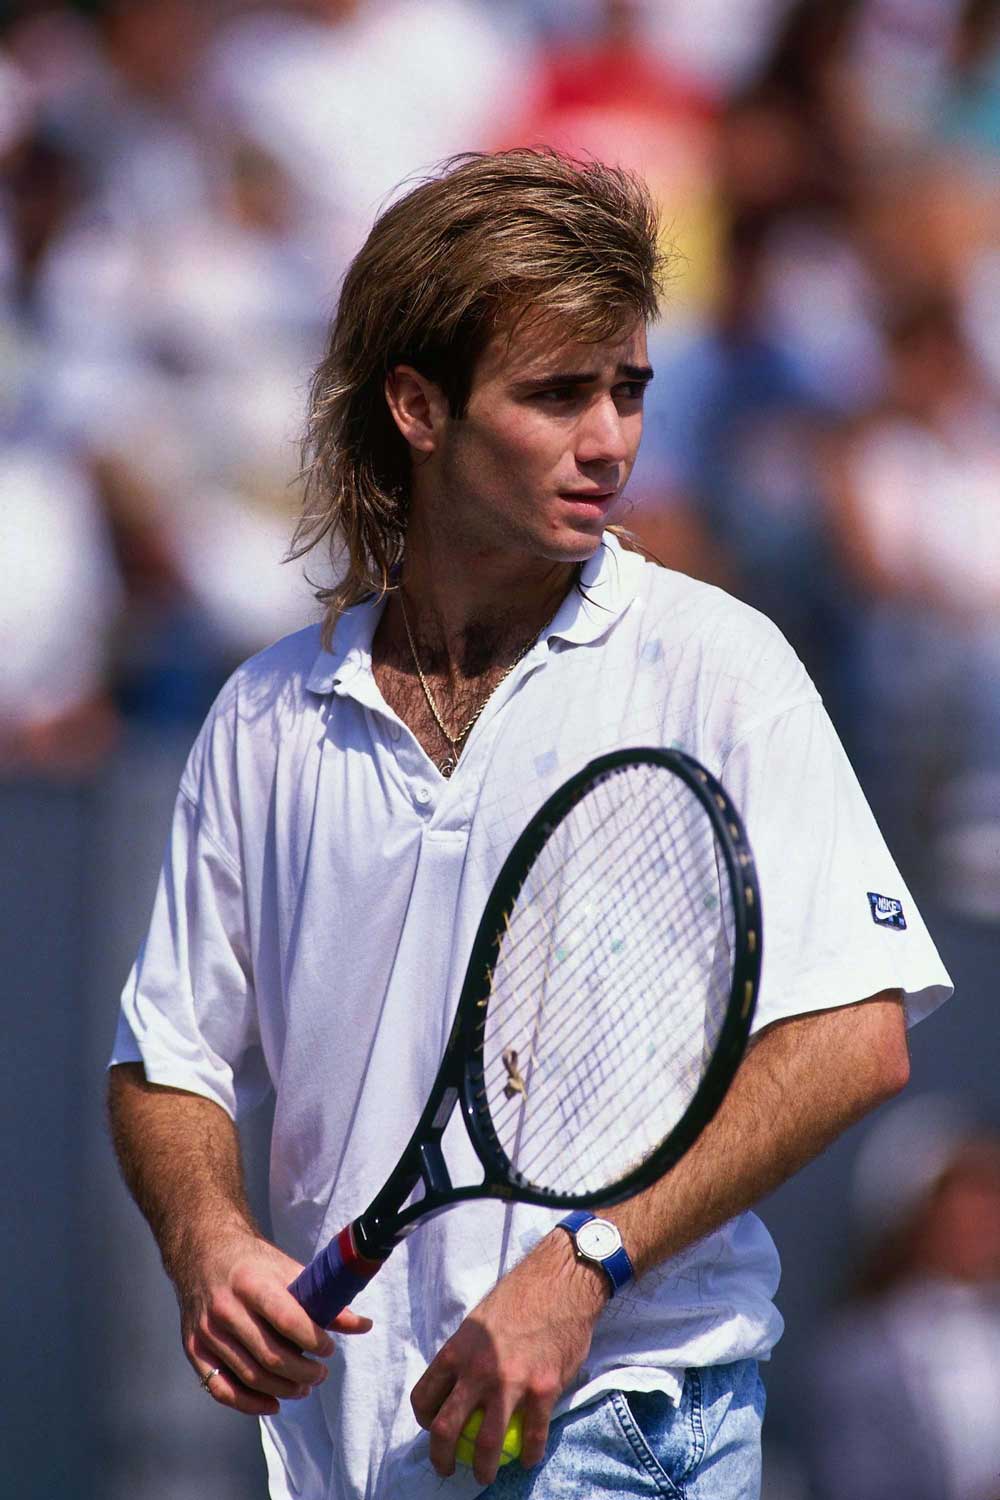 LOS ANGELES, CA - SEPTEMBER: Andre Aggasi prepares to serve during the Volvo International Tennis Tournament on September 1988 in Los Angeles, California. (Photo by Andrew D. Bernstein/Getty Images)